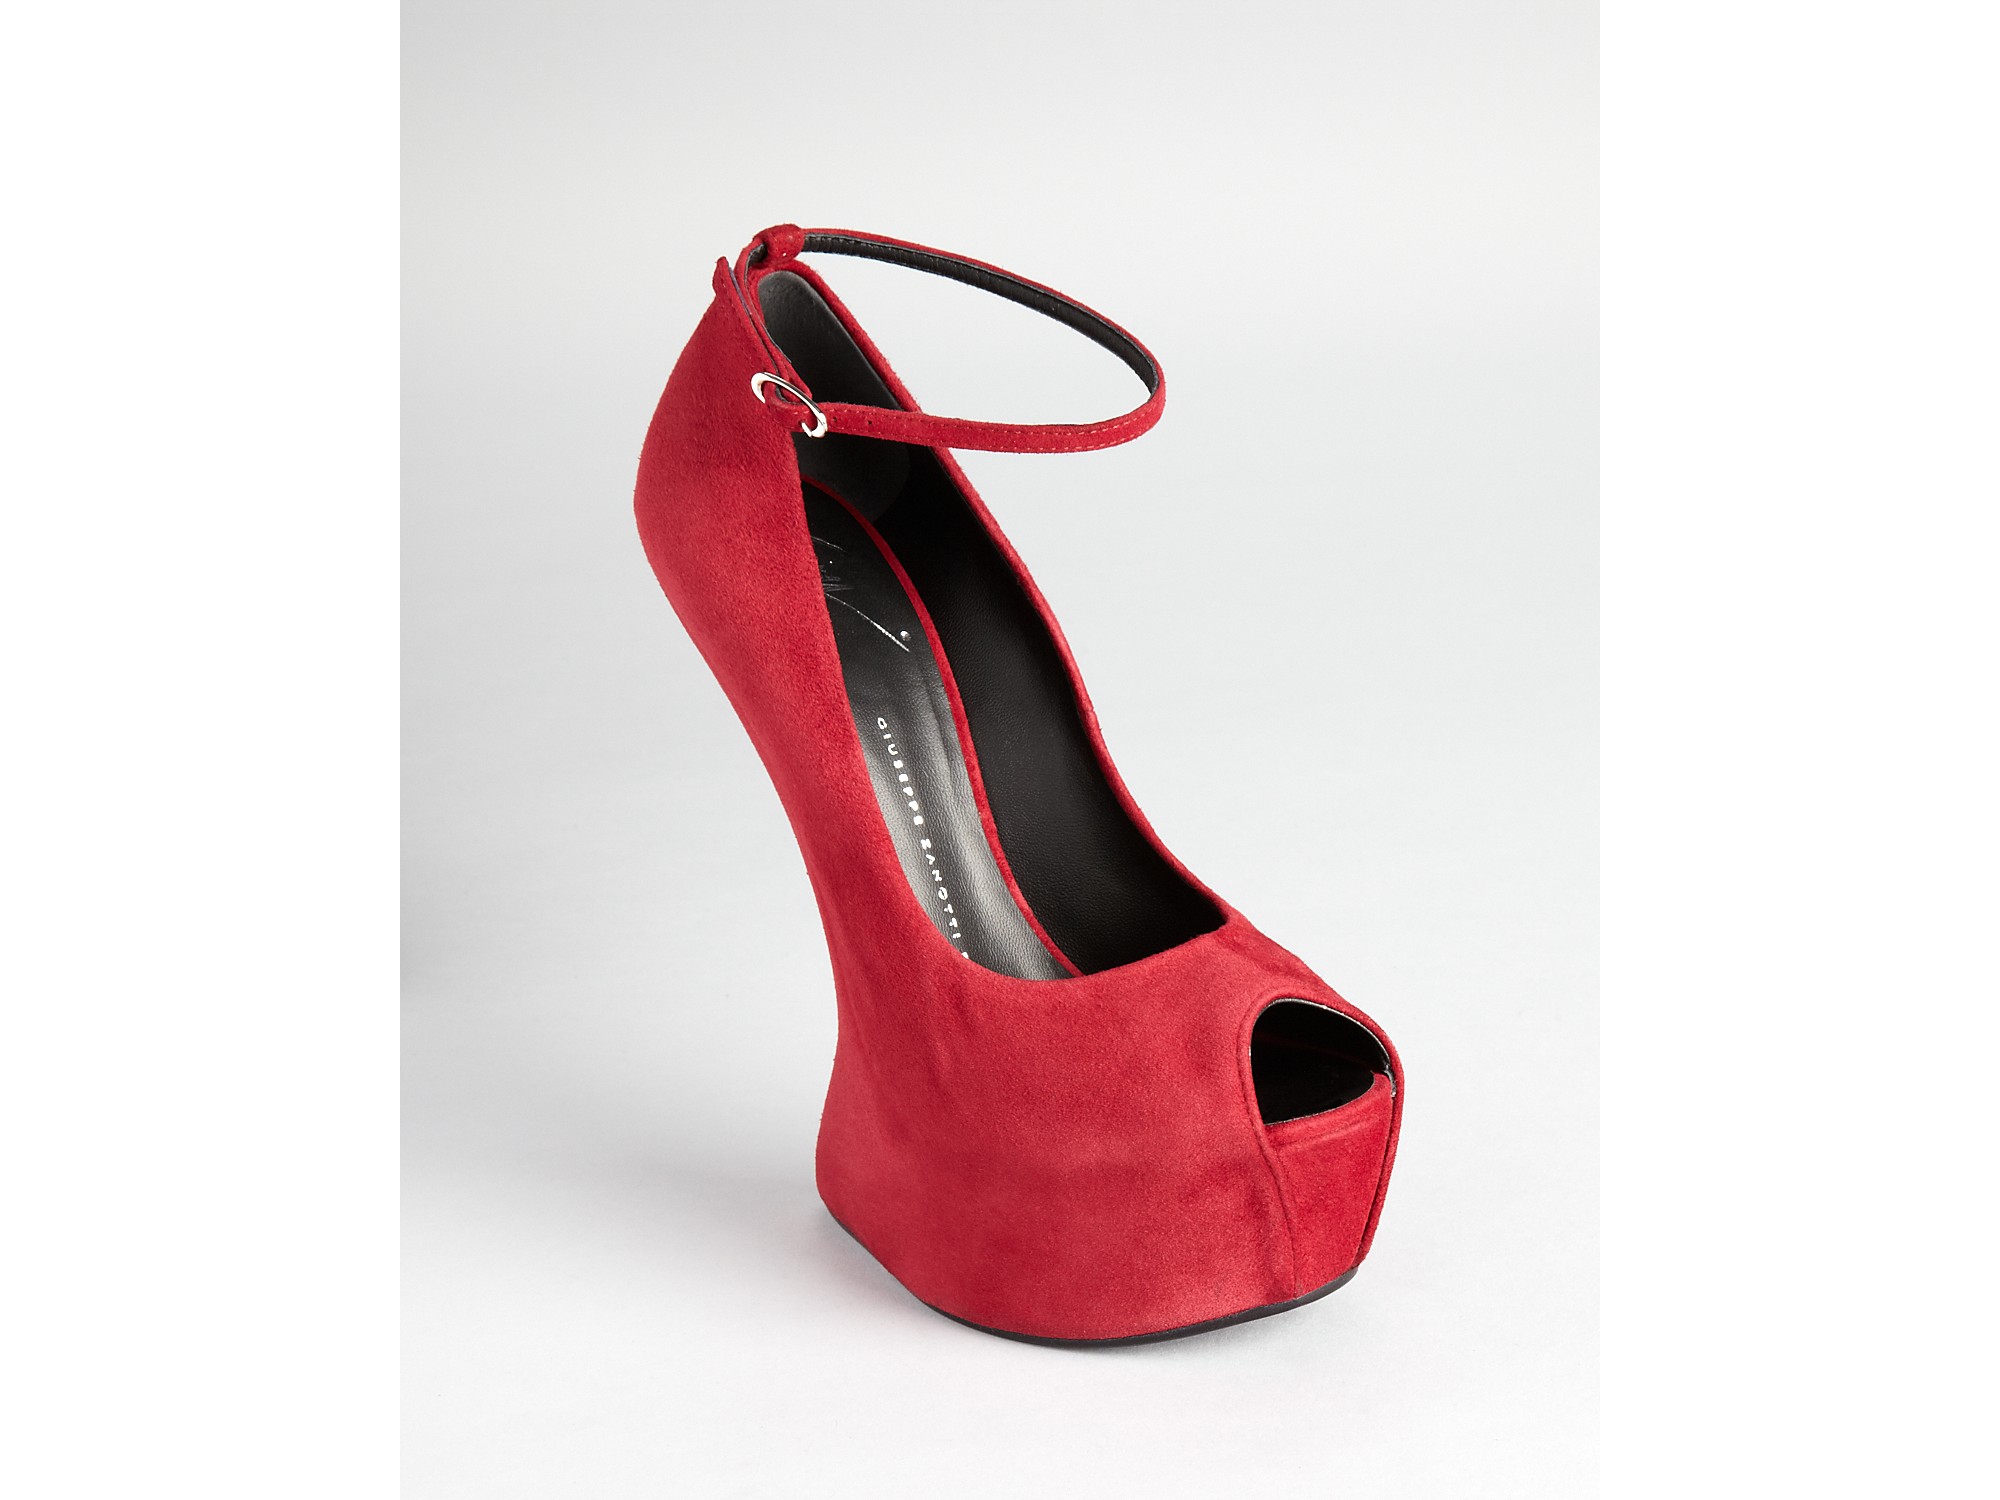 Giuseppe Zanotti Sculpted Wedges Jem Open Toe in Red Suede (Red) - Lyst